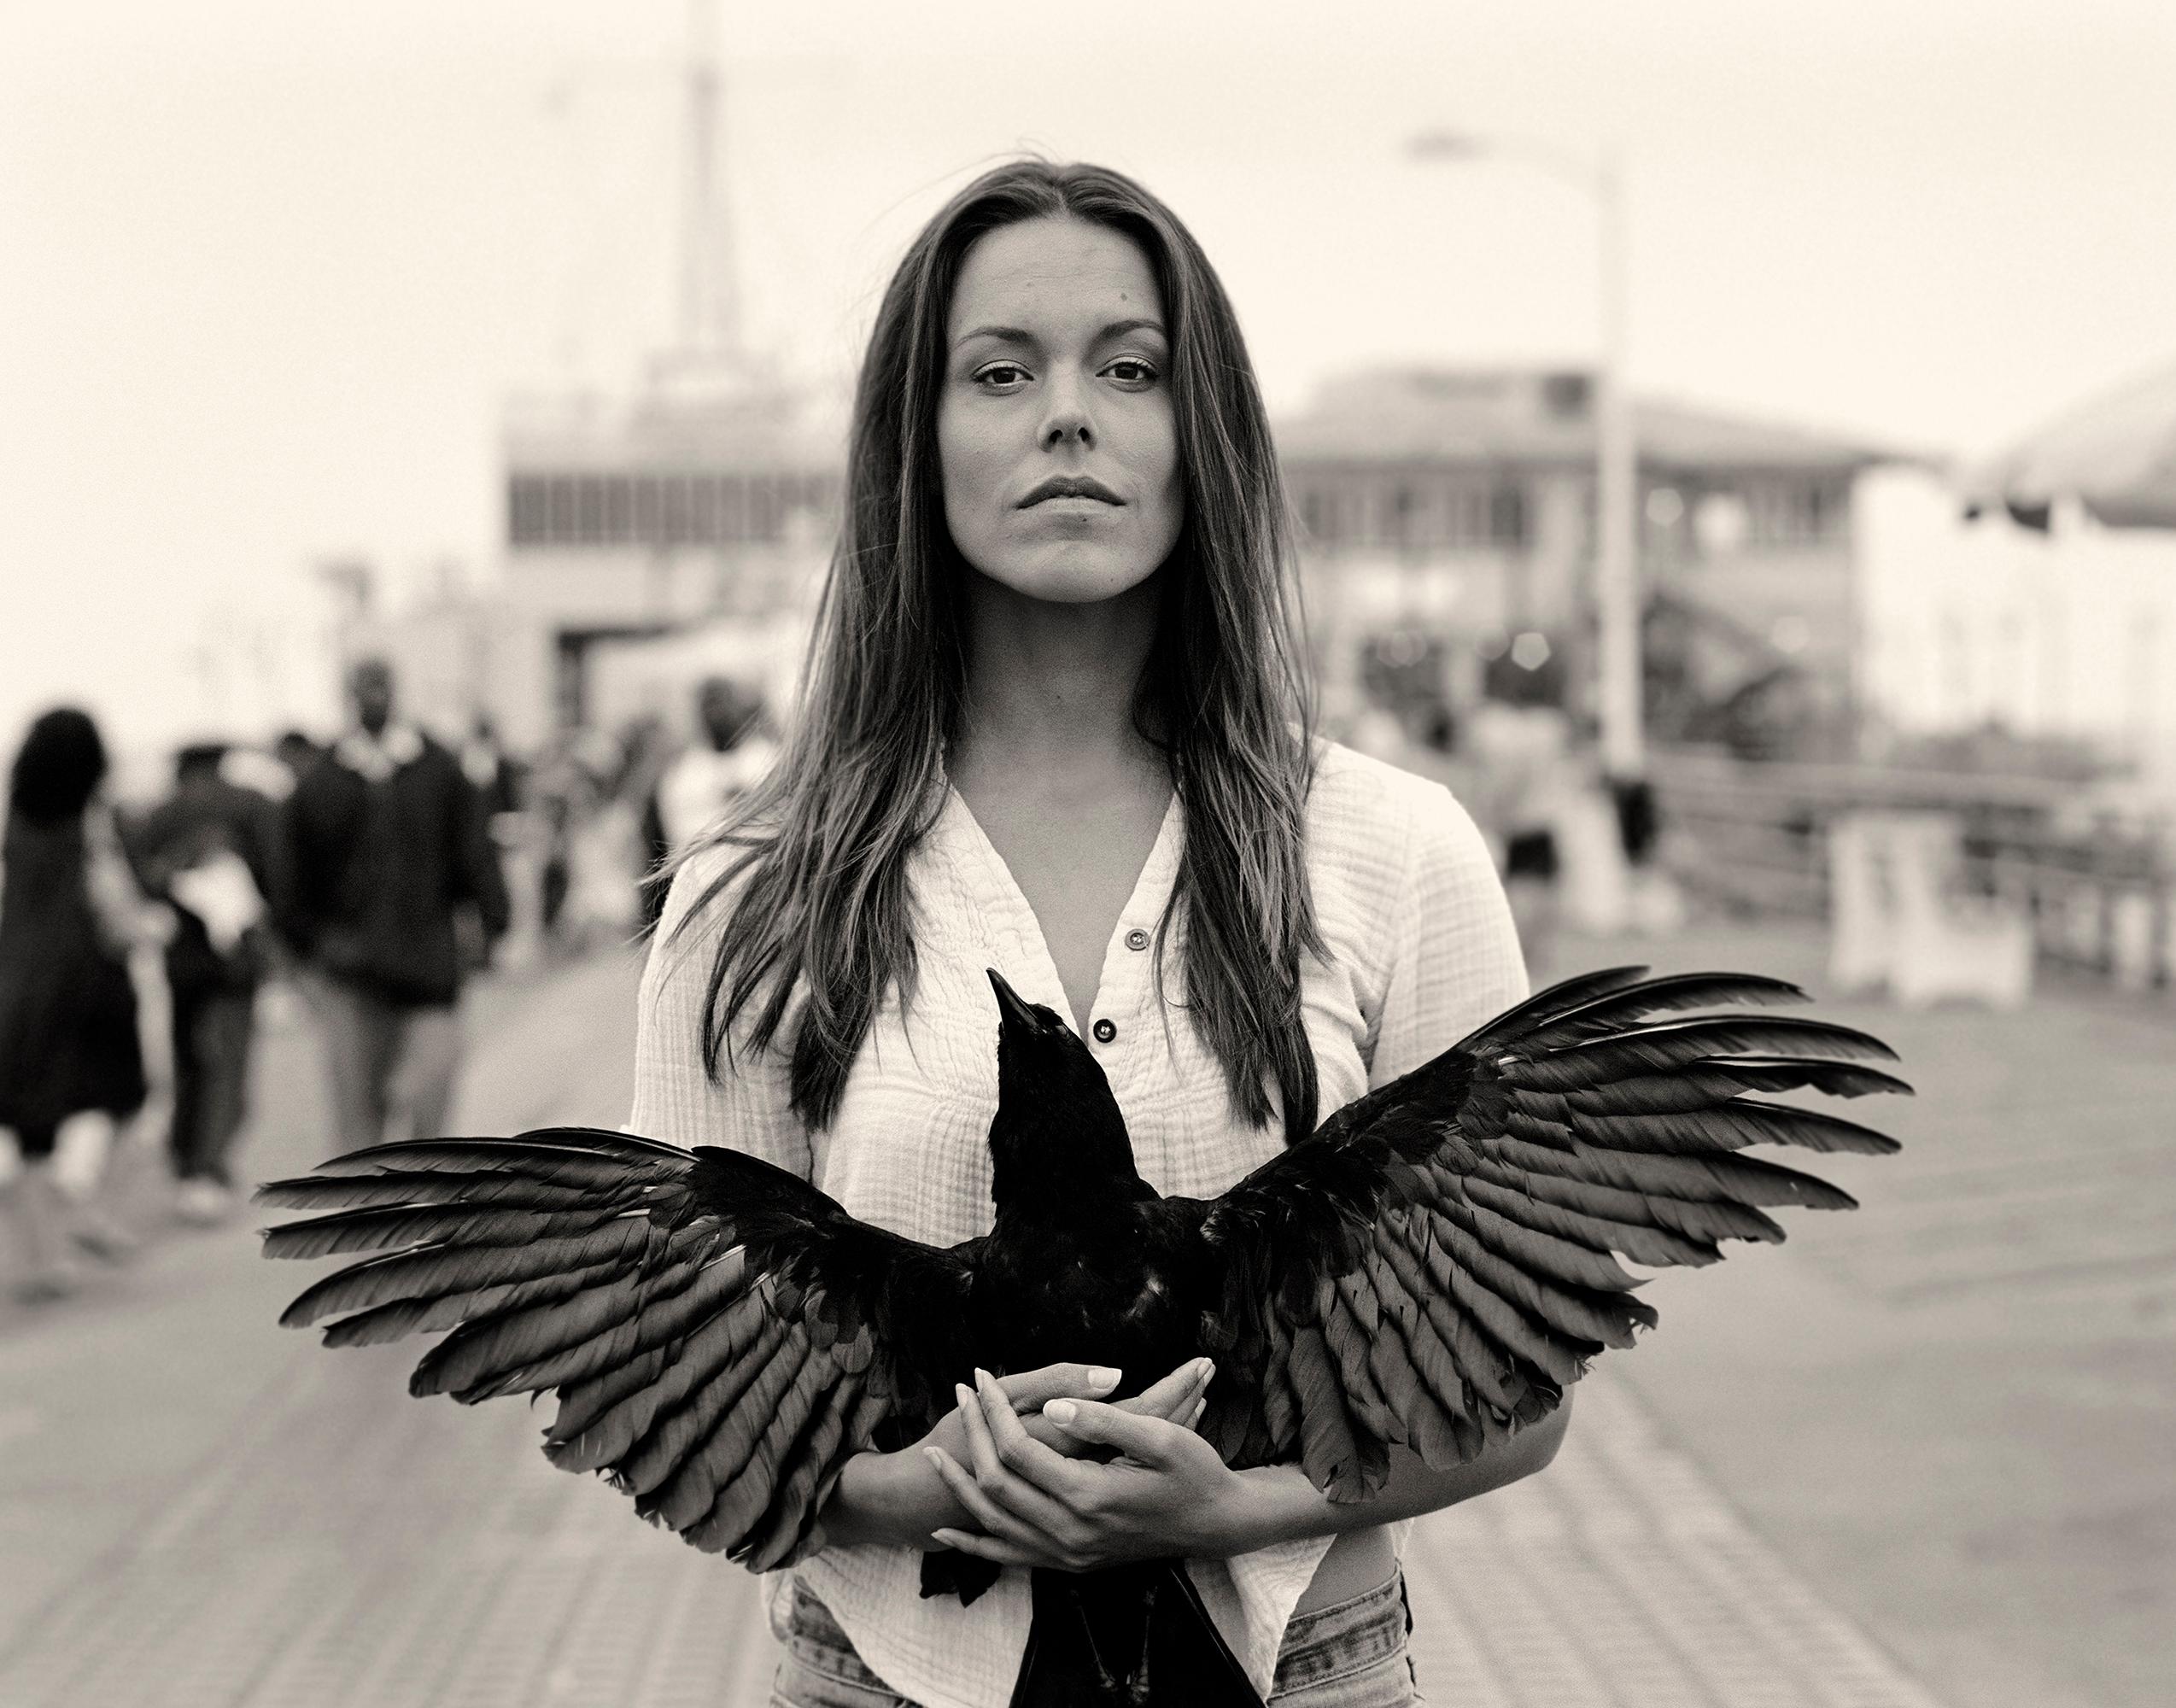 'Tawney' is from the series of archival black and white photographs by the artist, 'Between Two Worlds.' In this photograph, a central female figure confronts the viewer directly holding a large black spread-winged bird. This giclee is  #1 in an